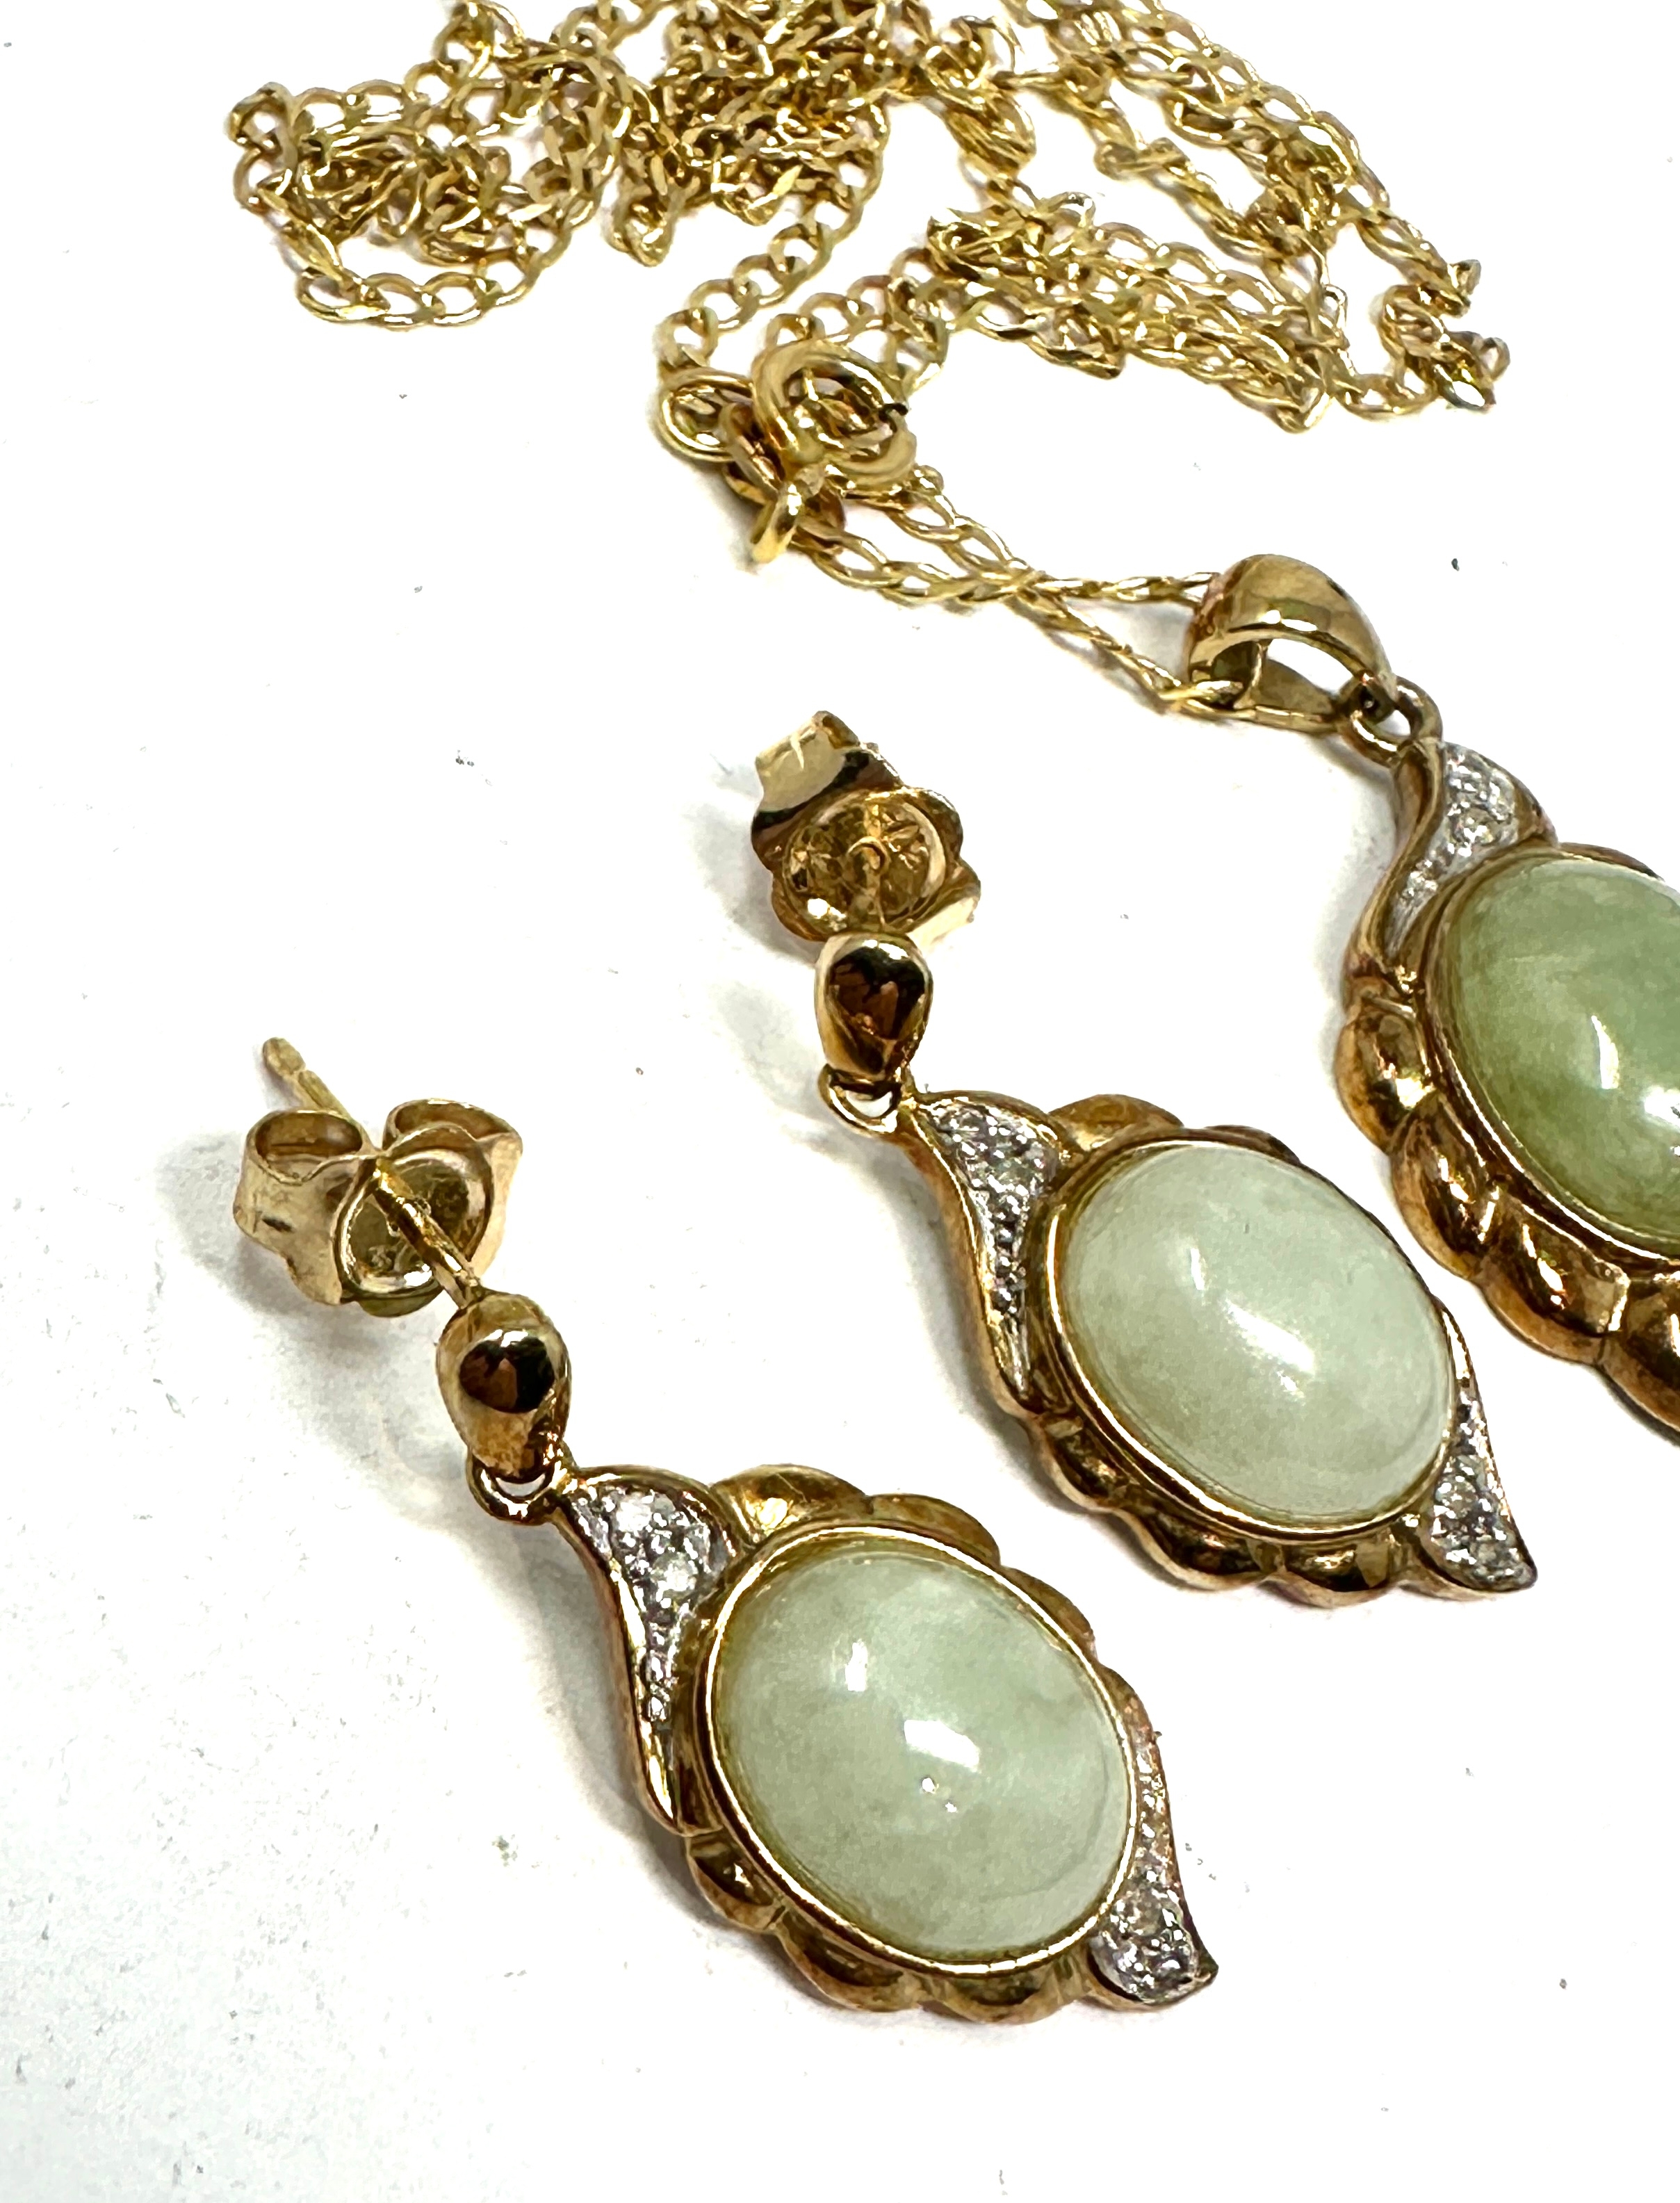 9ct gold diamond & jade pendant necklace & earring set weight 6.6g - Image 2 of 4